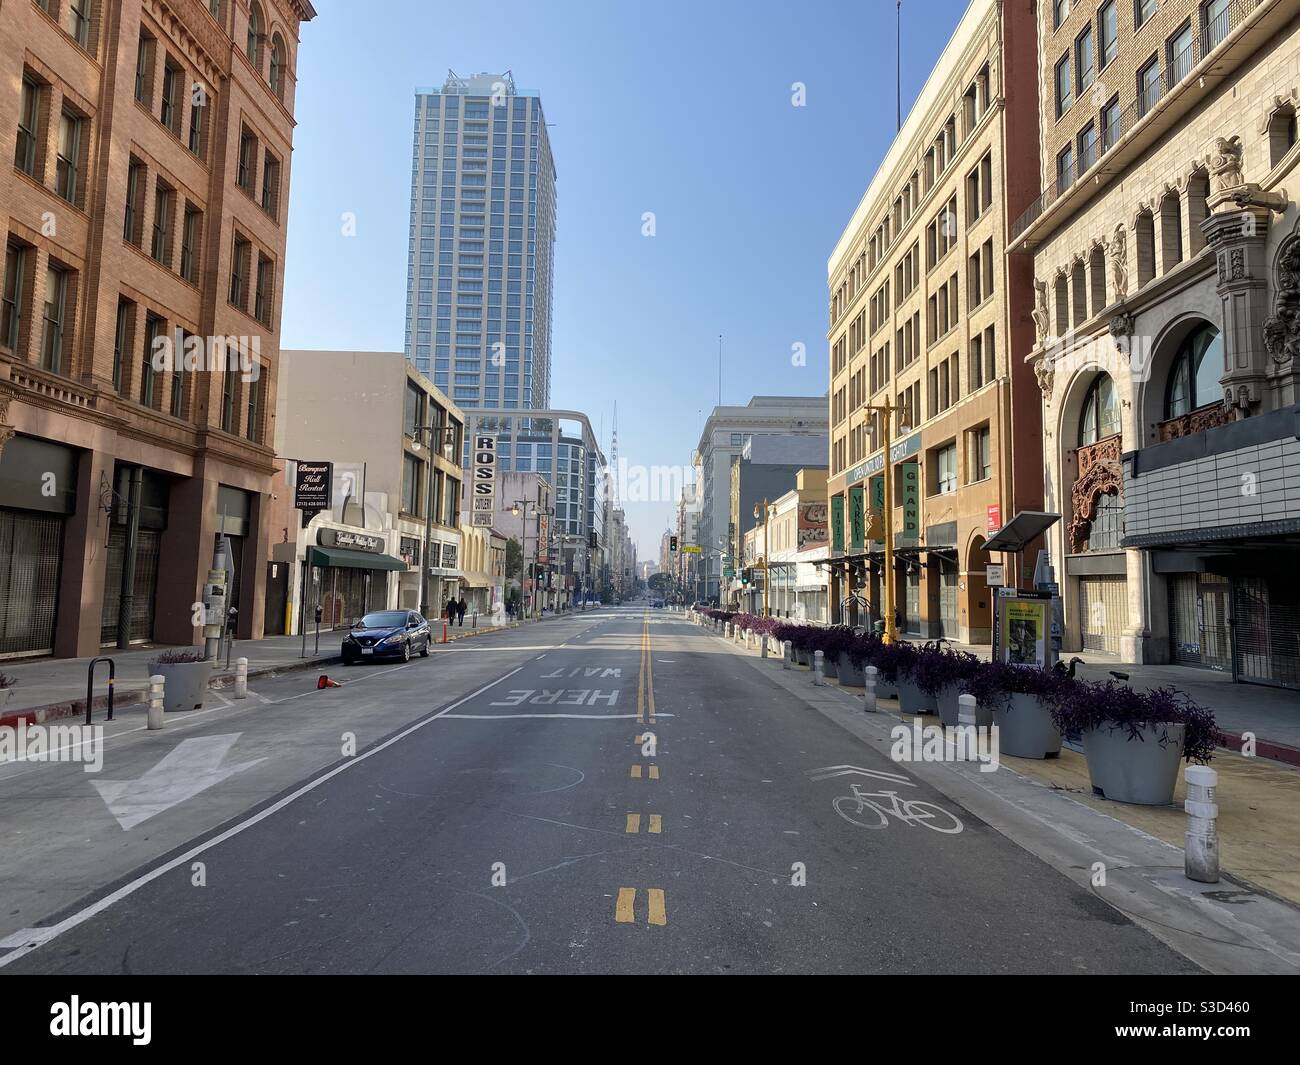 LOS ANGELES, CA, NOV 2020: looking south down mostly empty Broadway from the Million Dollar Theater and Bradbury Building in historic neighborhood of Downtown during Covid-19 pandemic Stock Photo